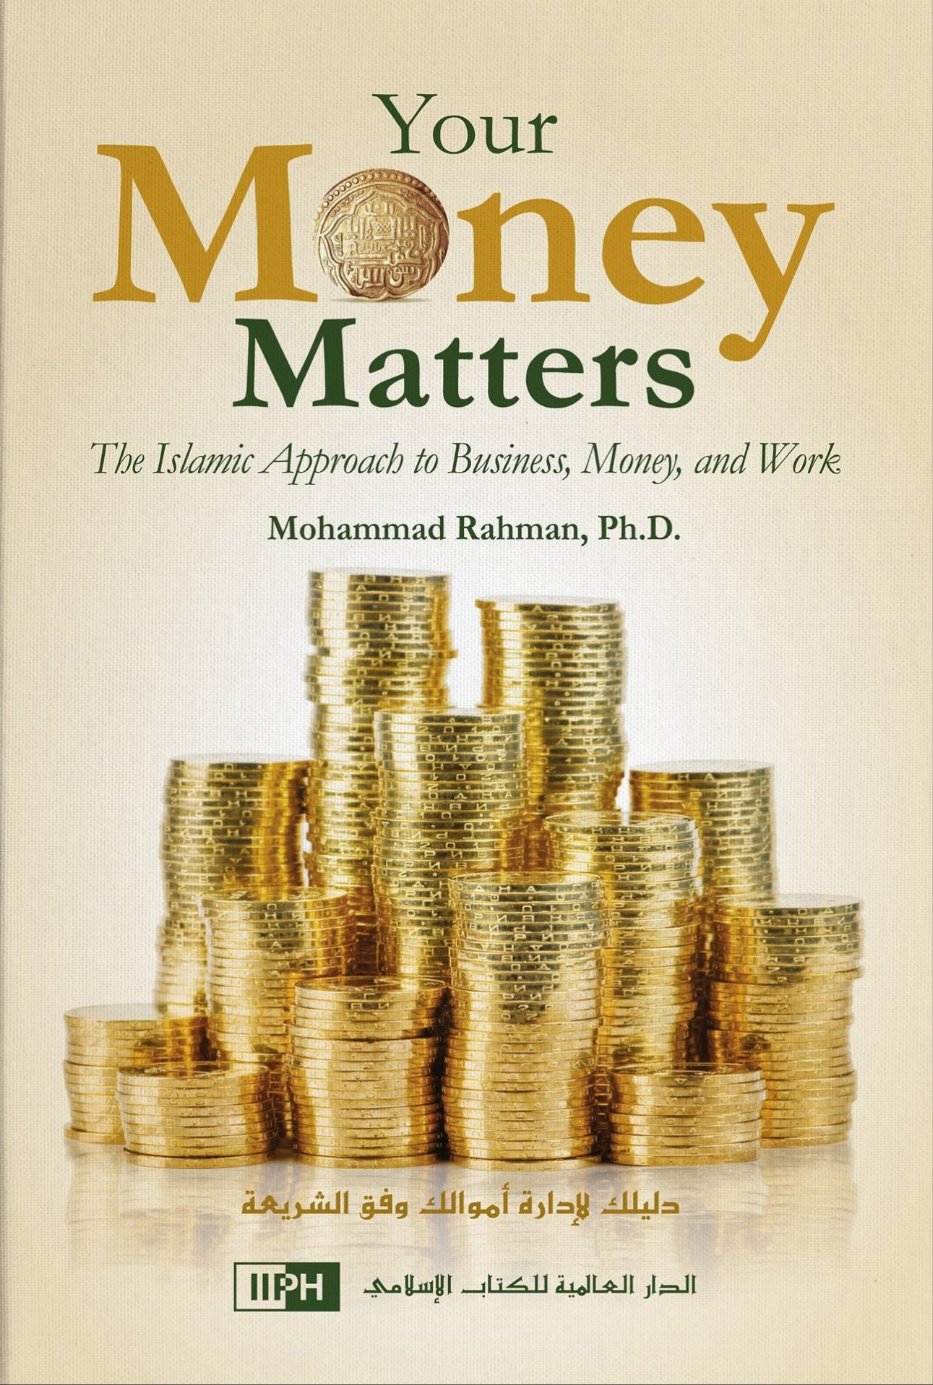 Your Money Matters: The Islamic Approach to Business, Money and Work